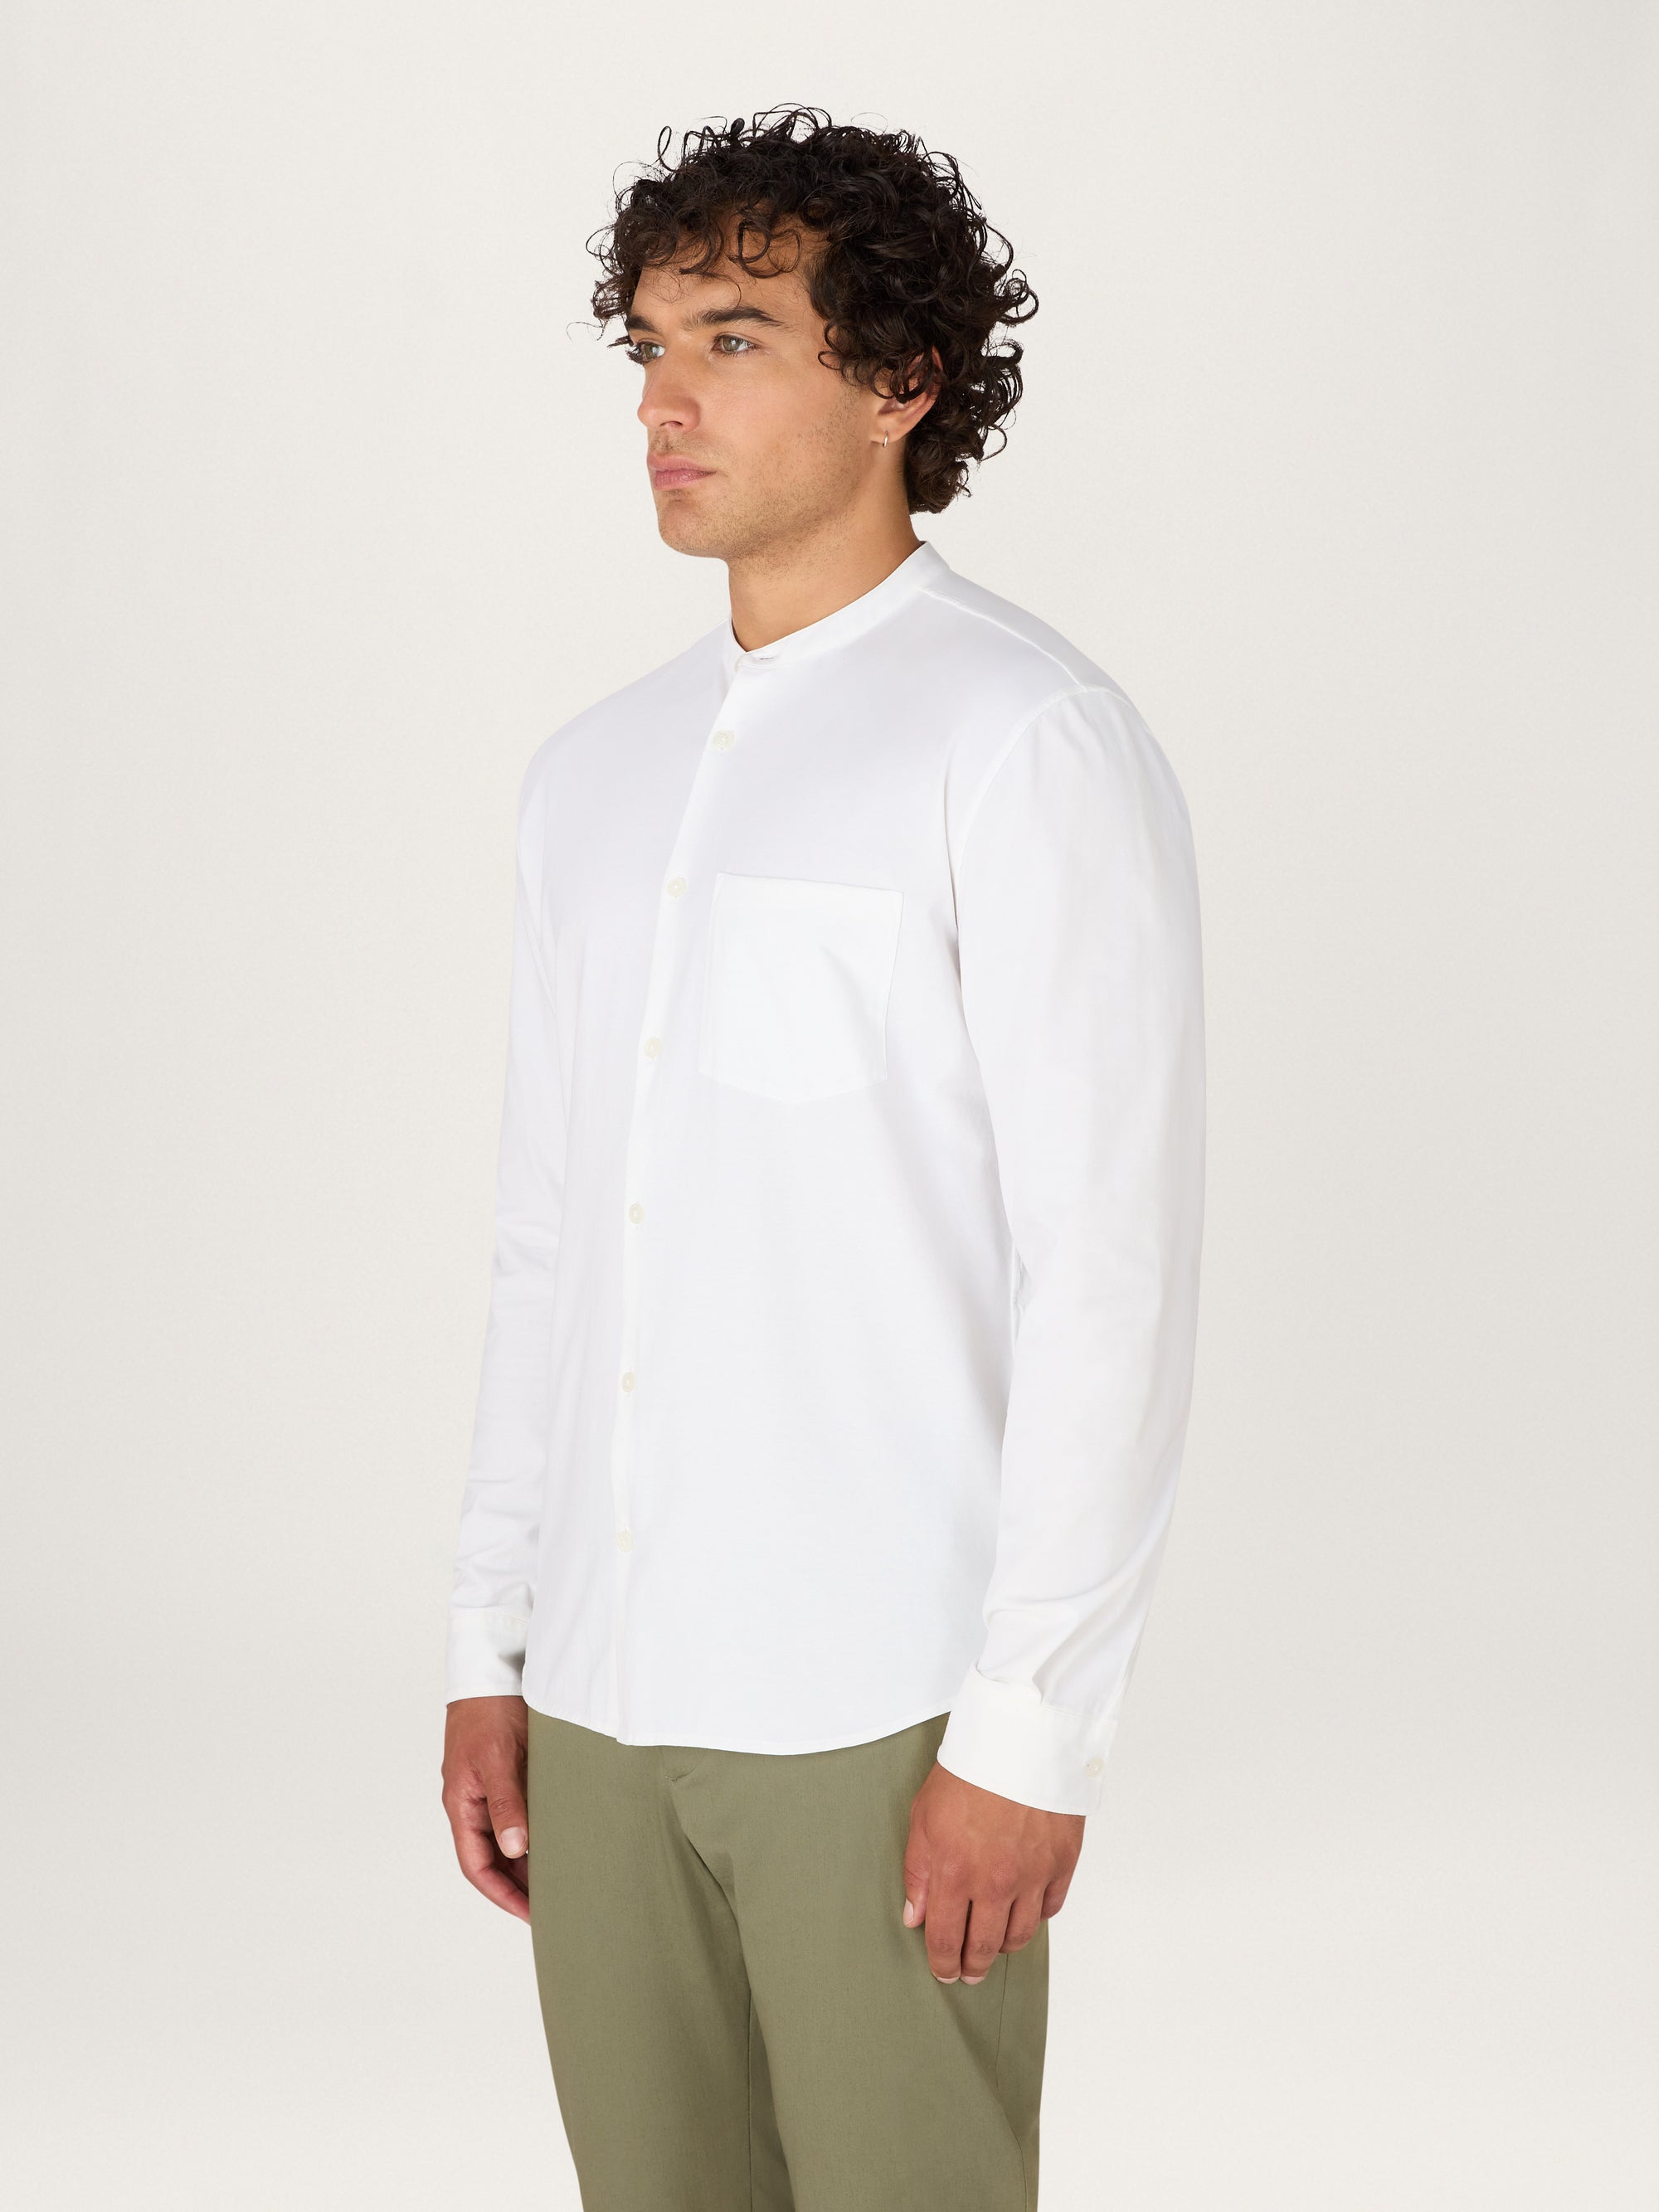 The All Day Shirt Jersey || White